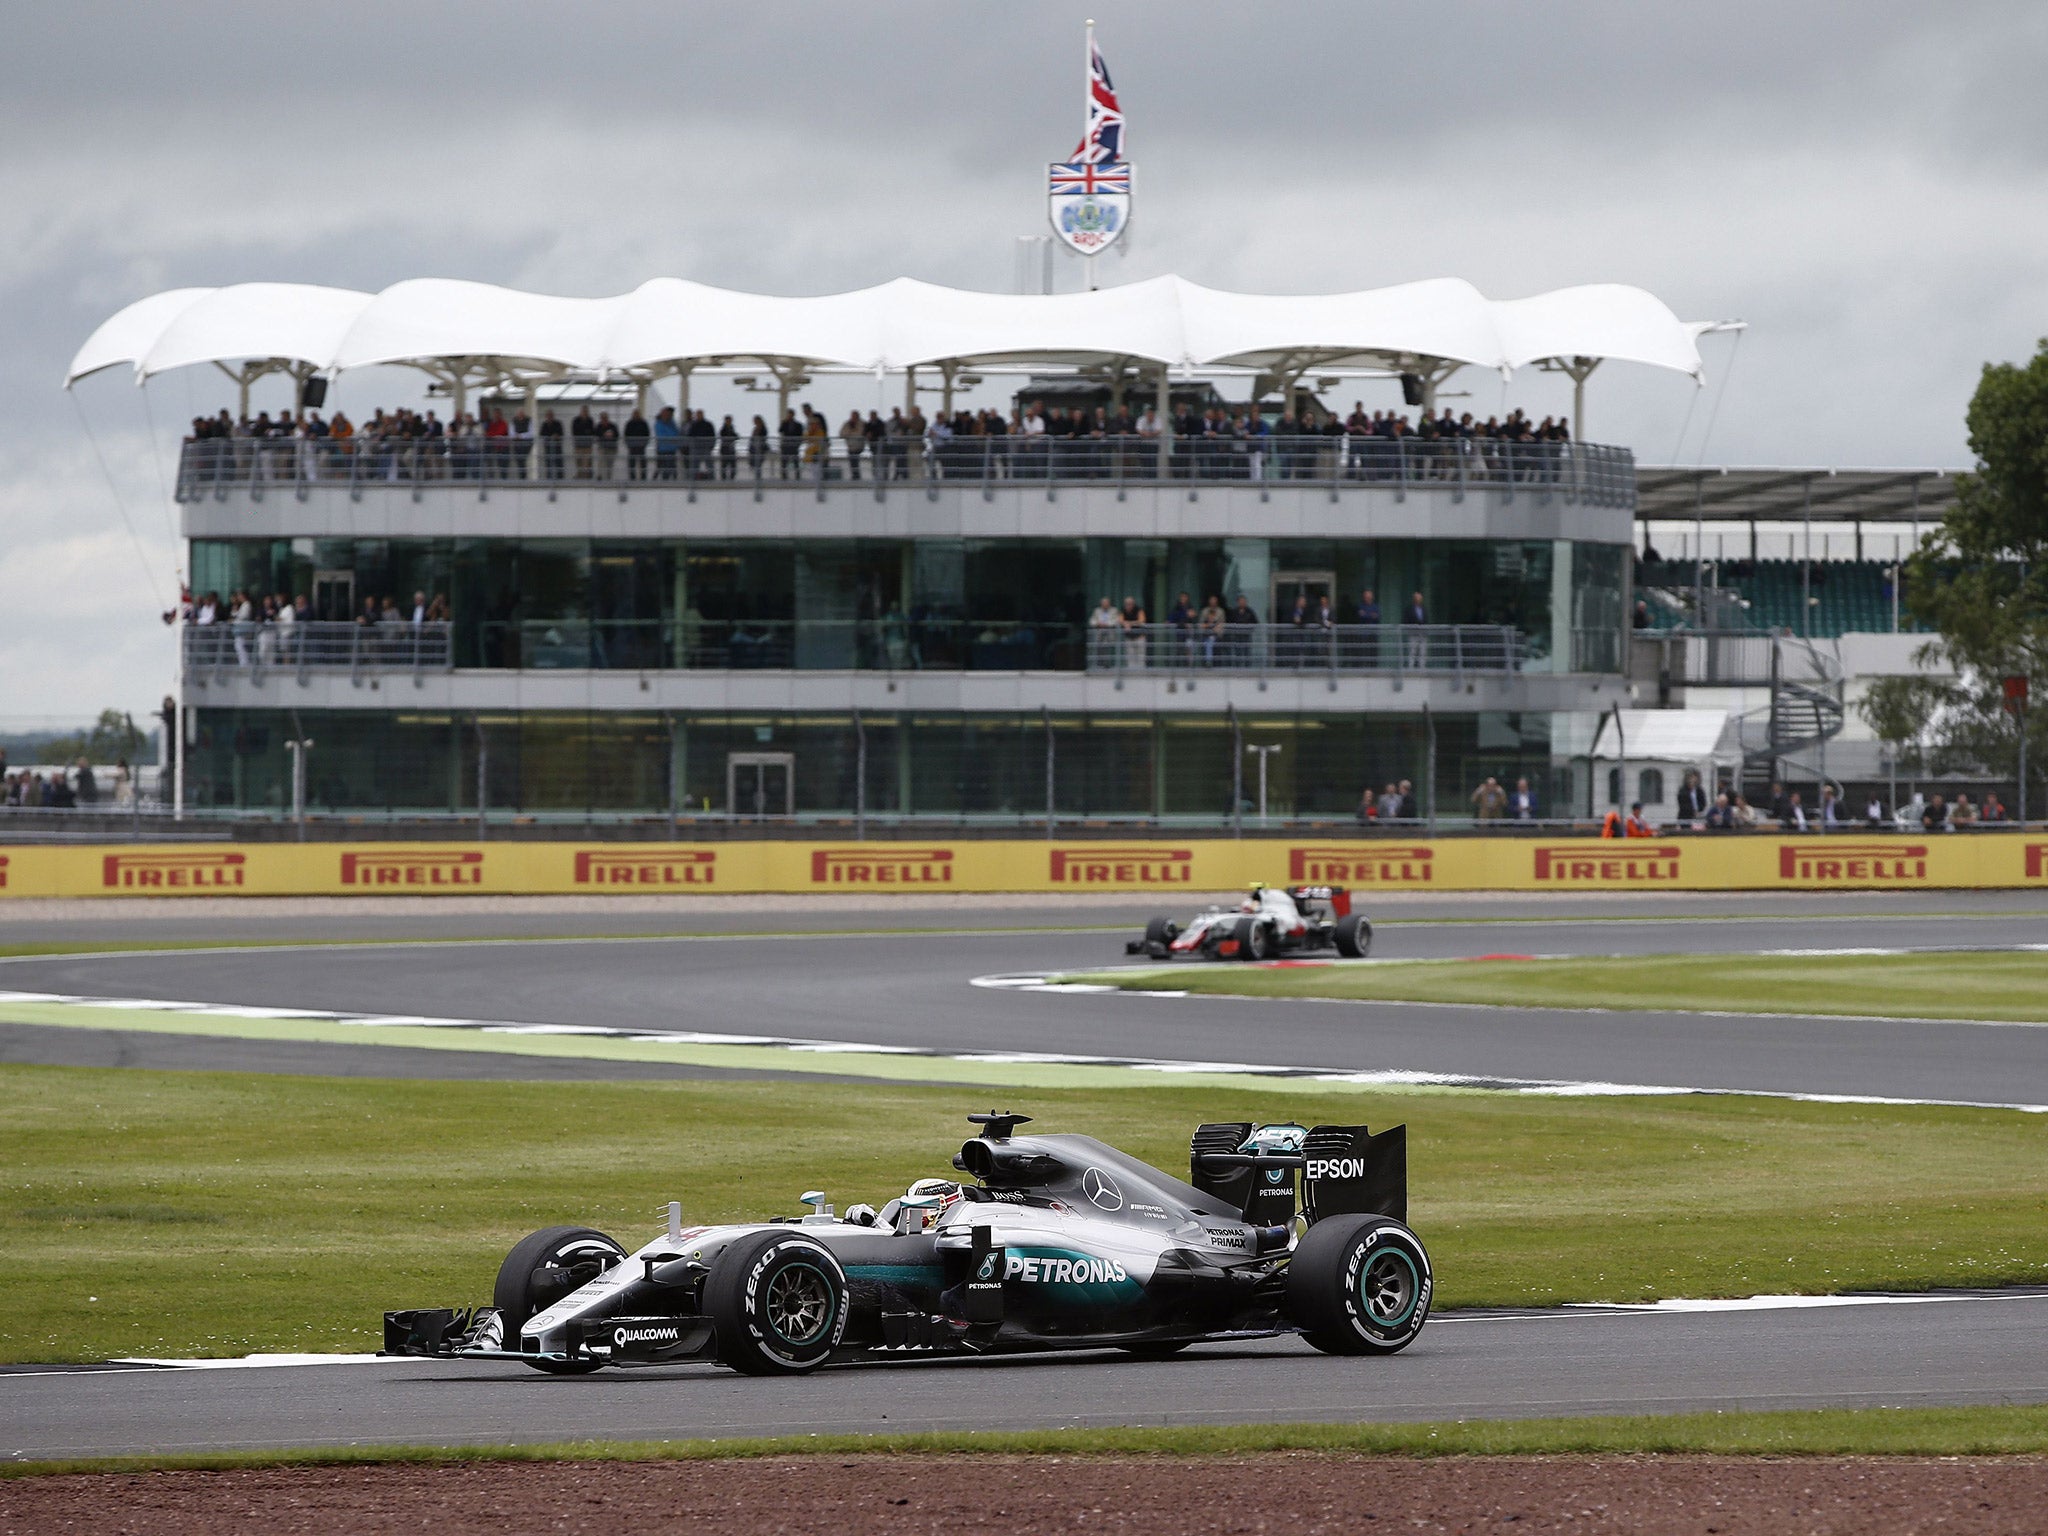 Lewis Hamilton set the fastest time in first practice, edging his Mercedes teammate Nico Rosberg